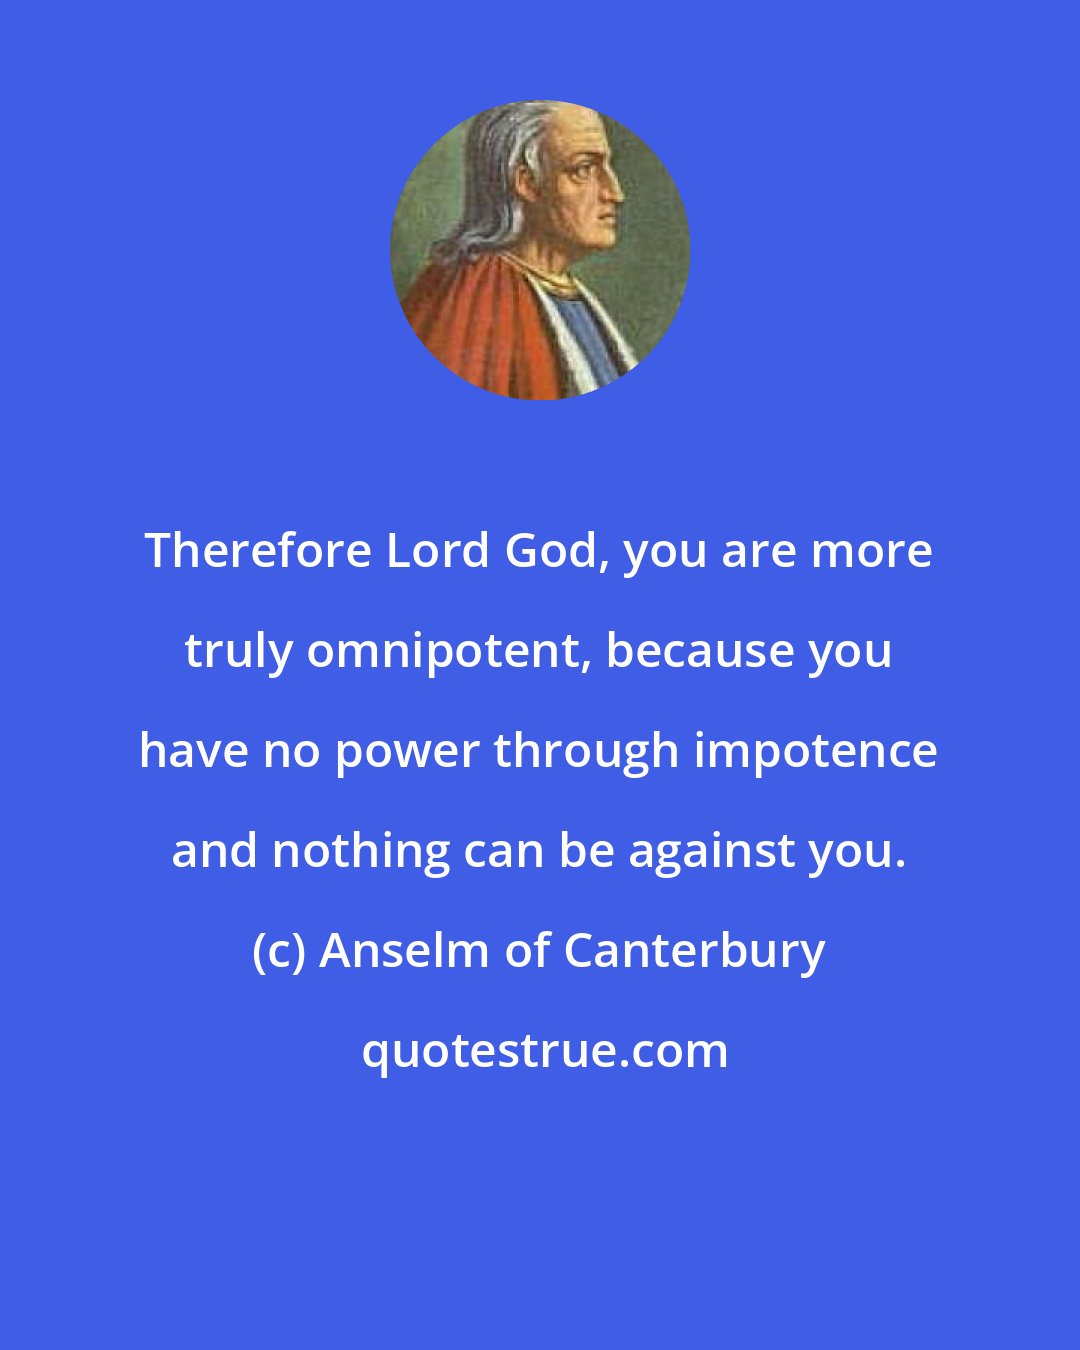 Anselm of Canterbury: Therefore Lord God, you are more truly omnipotent, because you have no power through impotence and nothing can be against you.